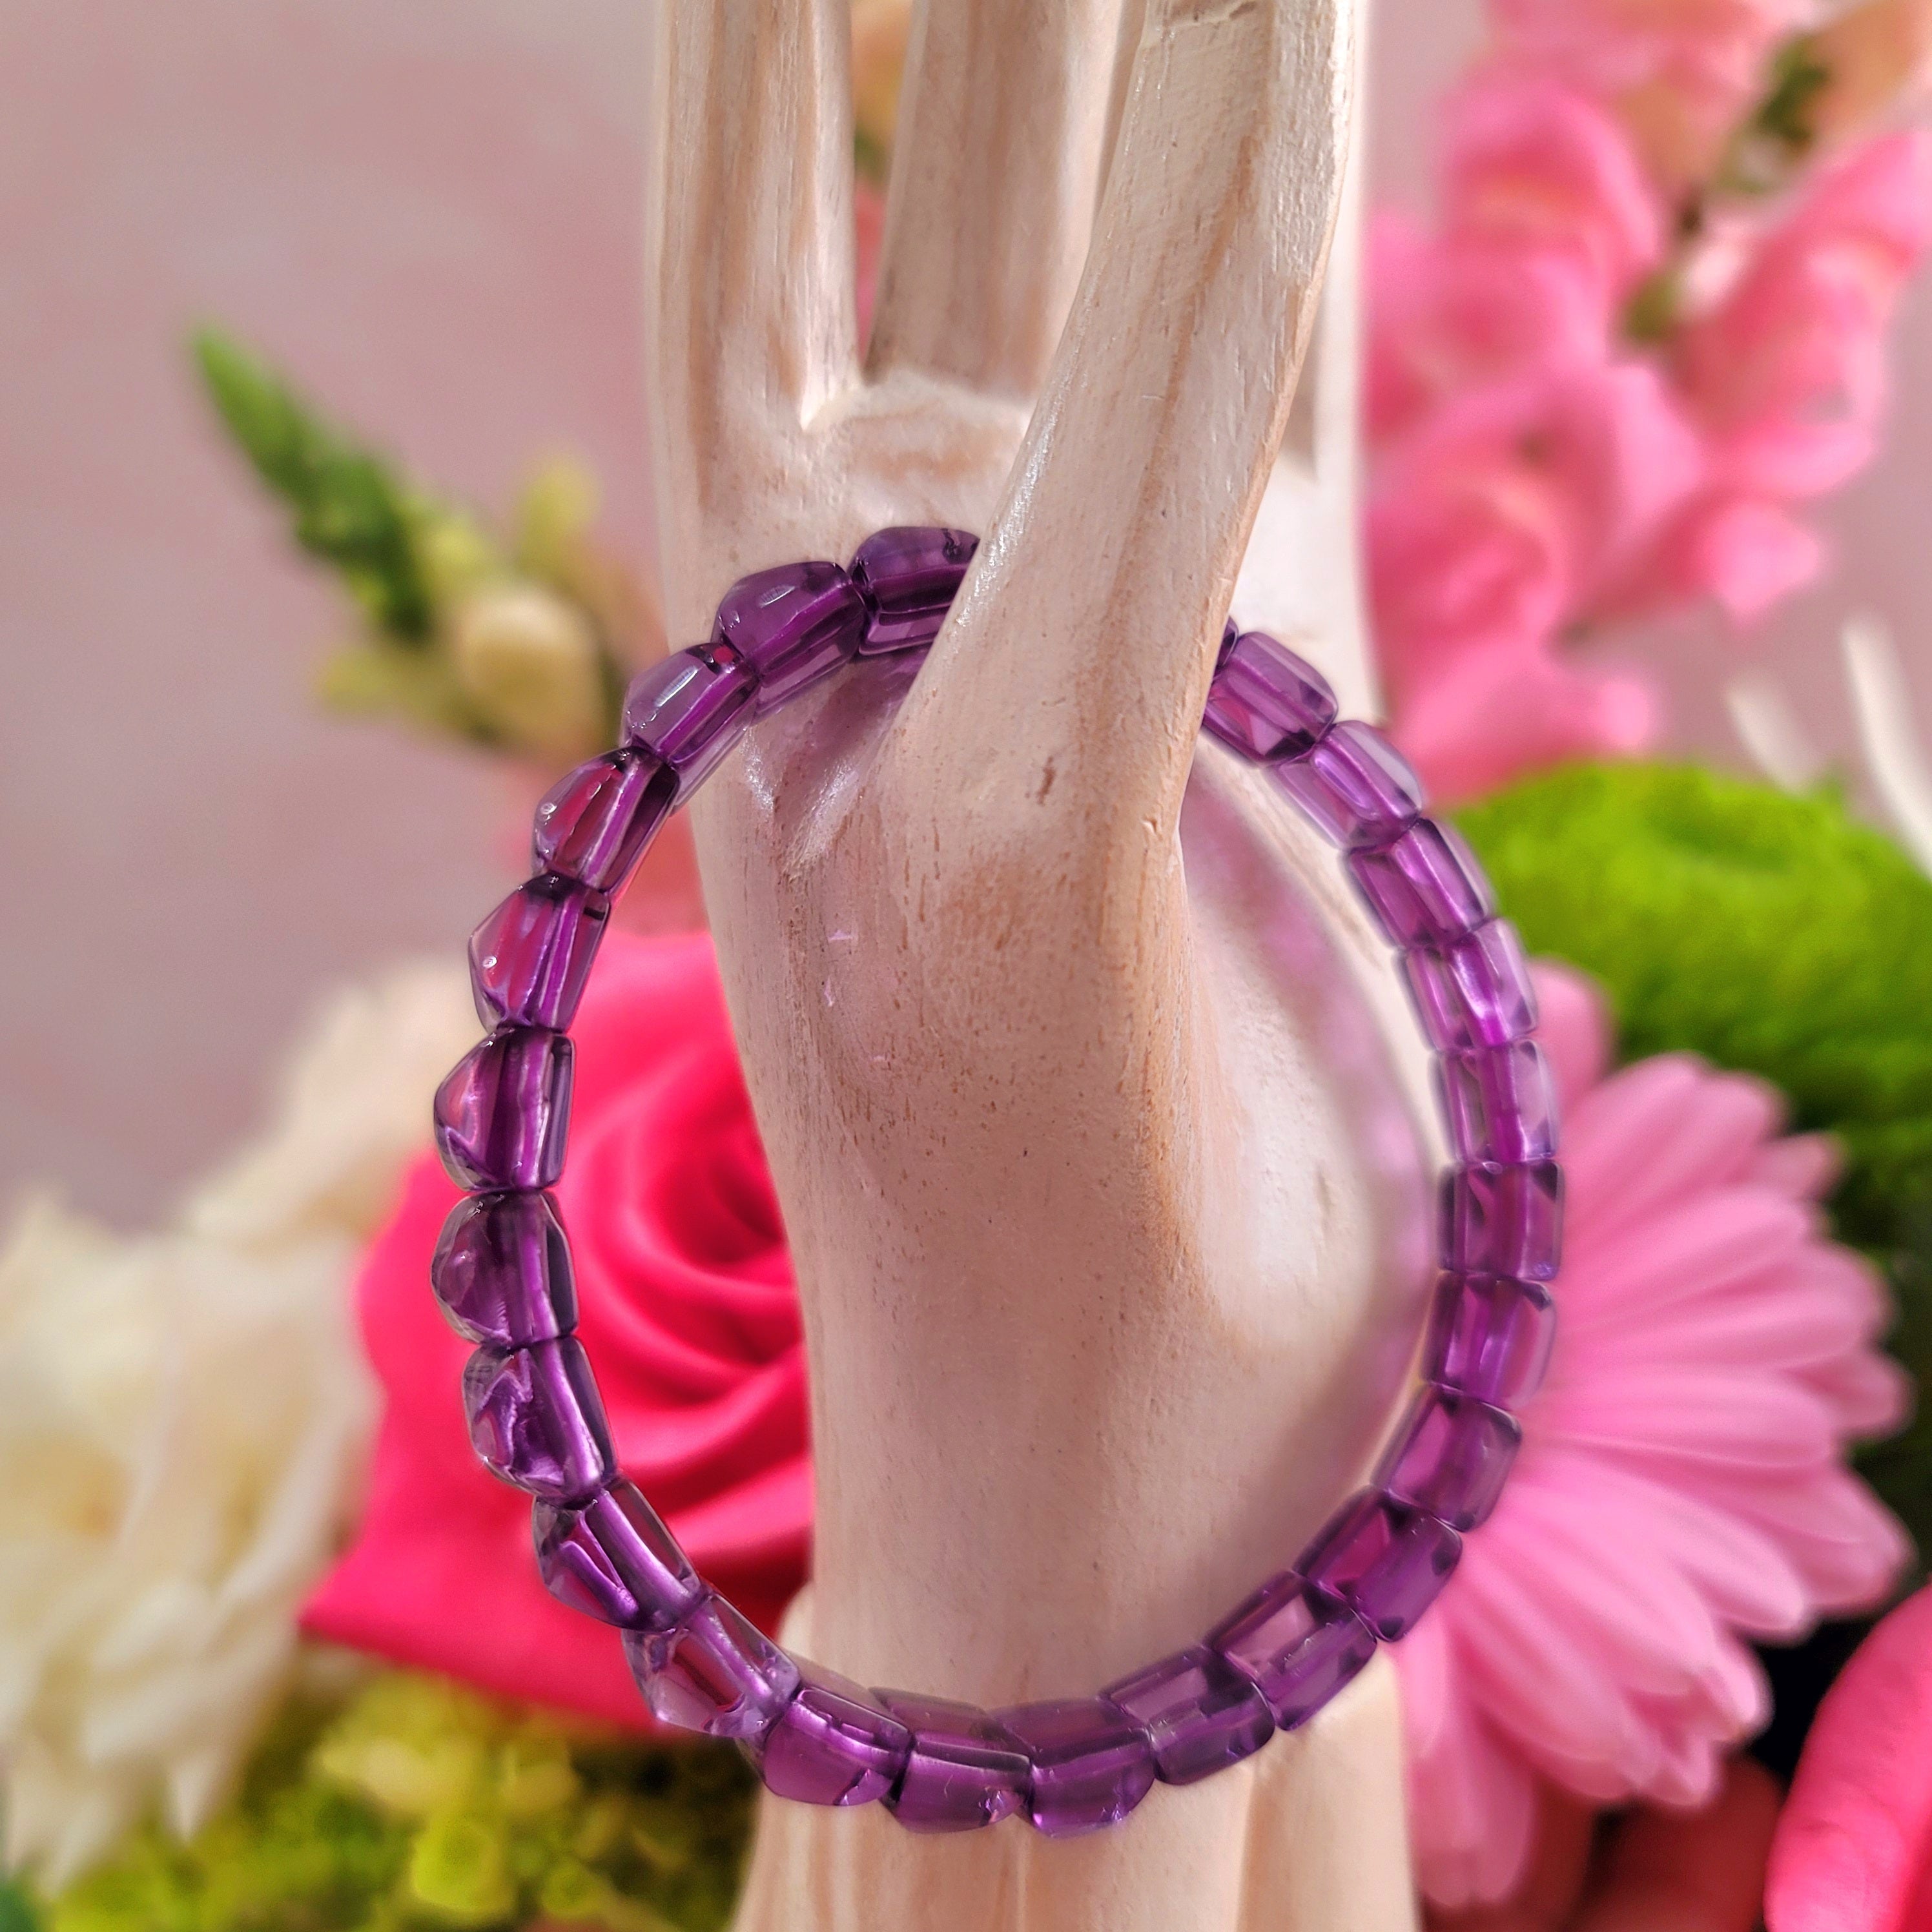 Amethyst Pyramid Stretchy Bangle Bracelet for Clarity, Intuition and Protection